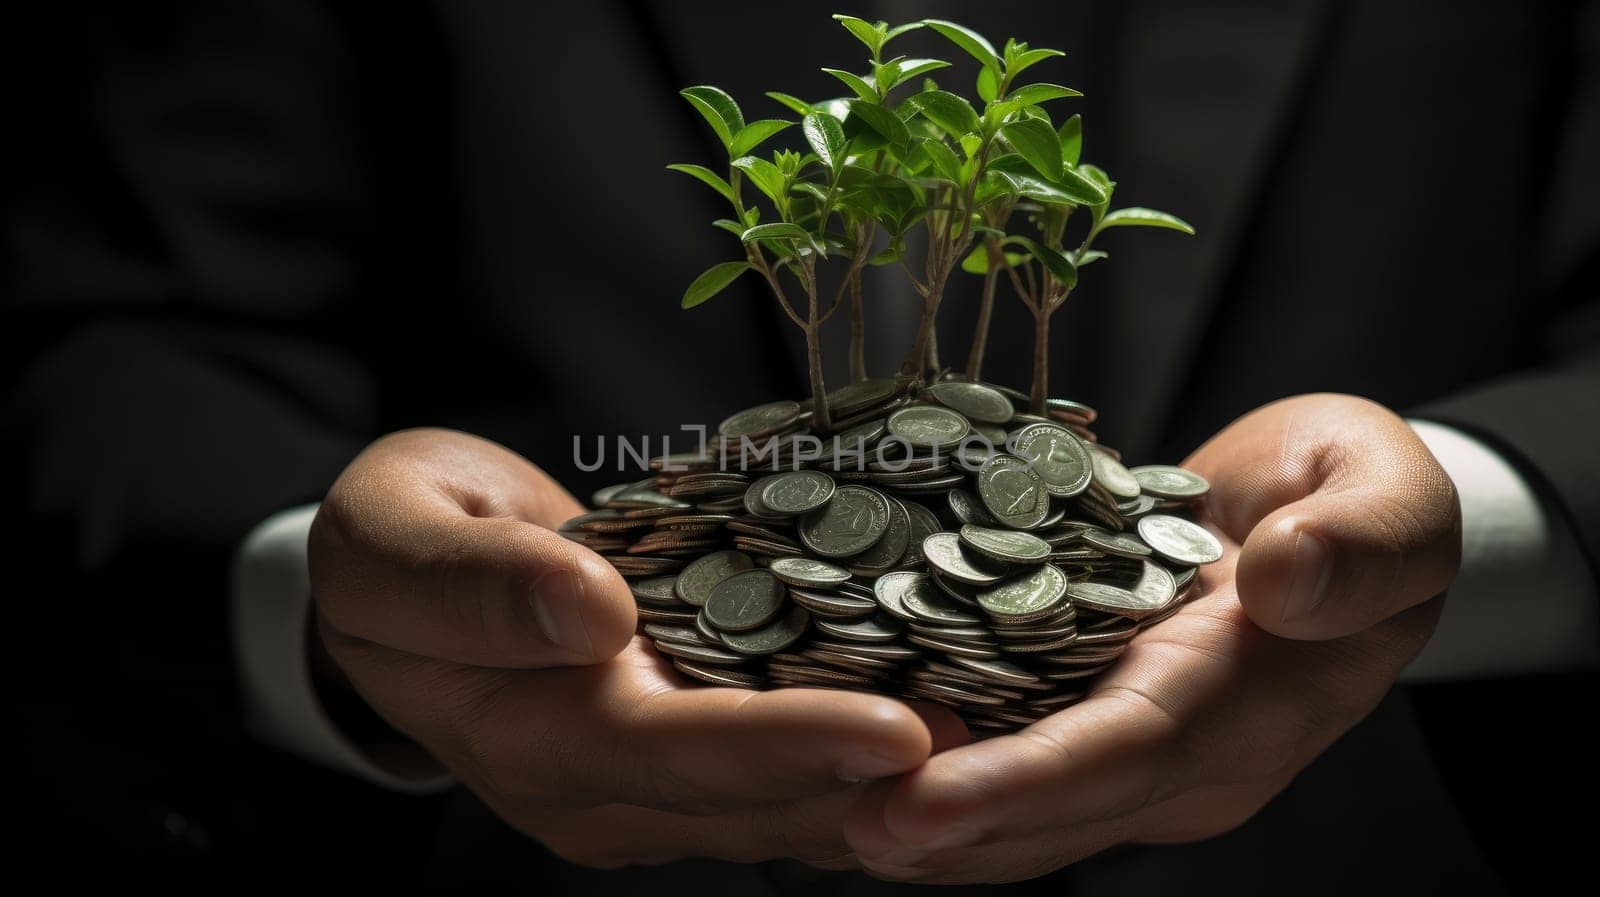 Sapling Sprouting from Hand with Silver Coins. Innovative Green Business Ideas for Finance and Investment. Conceptual Image Signifying Carbon Credits and Eco-Friendly Taxation. by ViShark